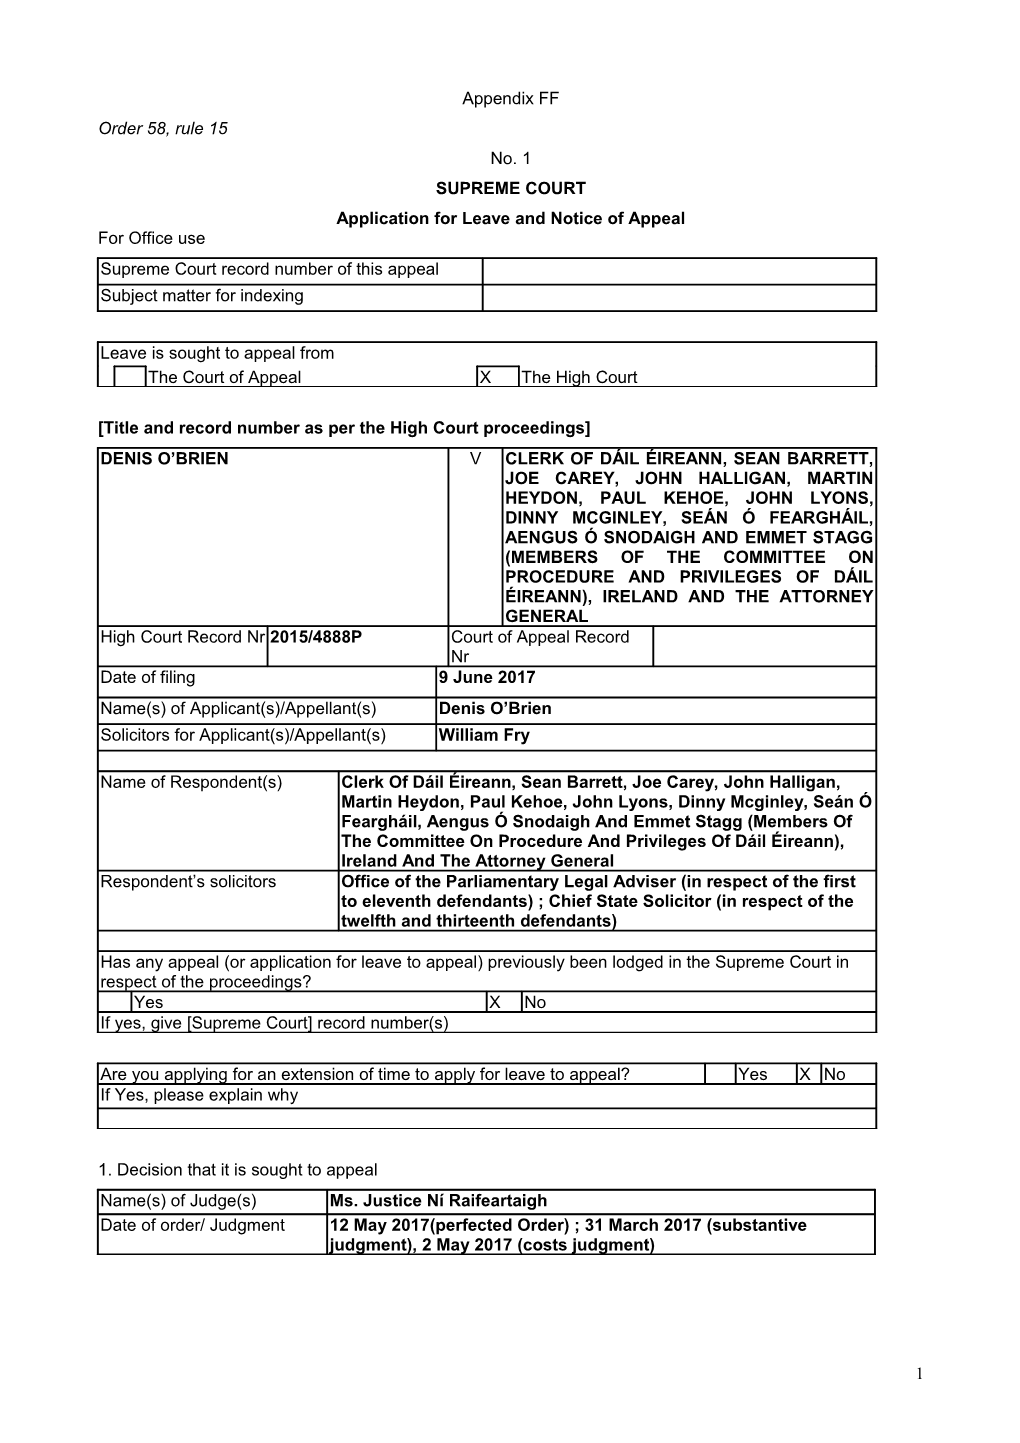 Application for Leave and Notice of Appeal